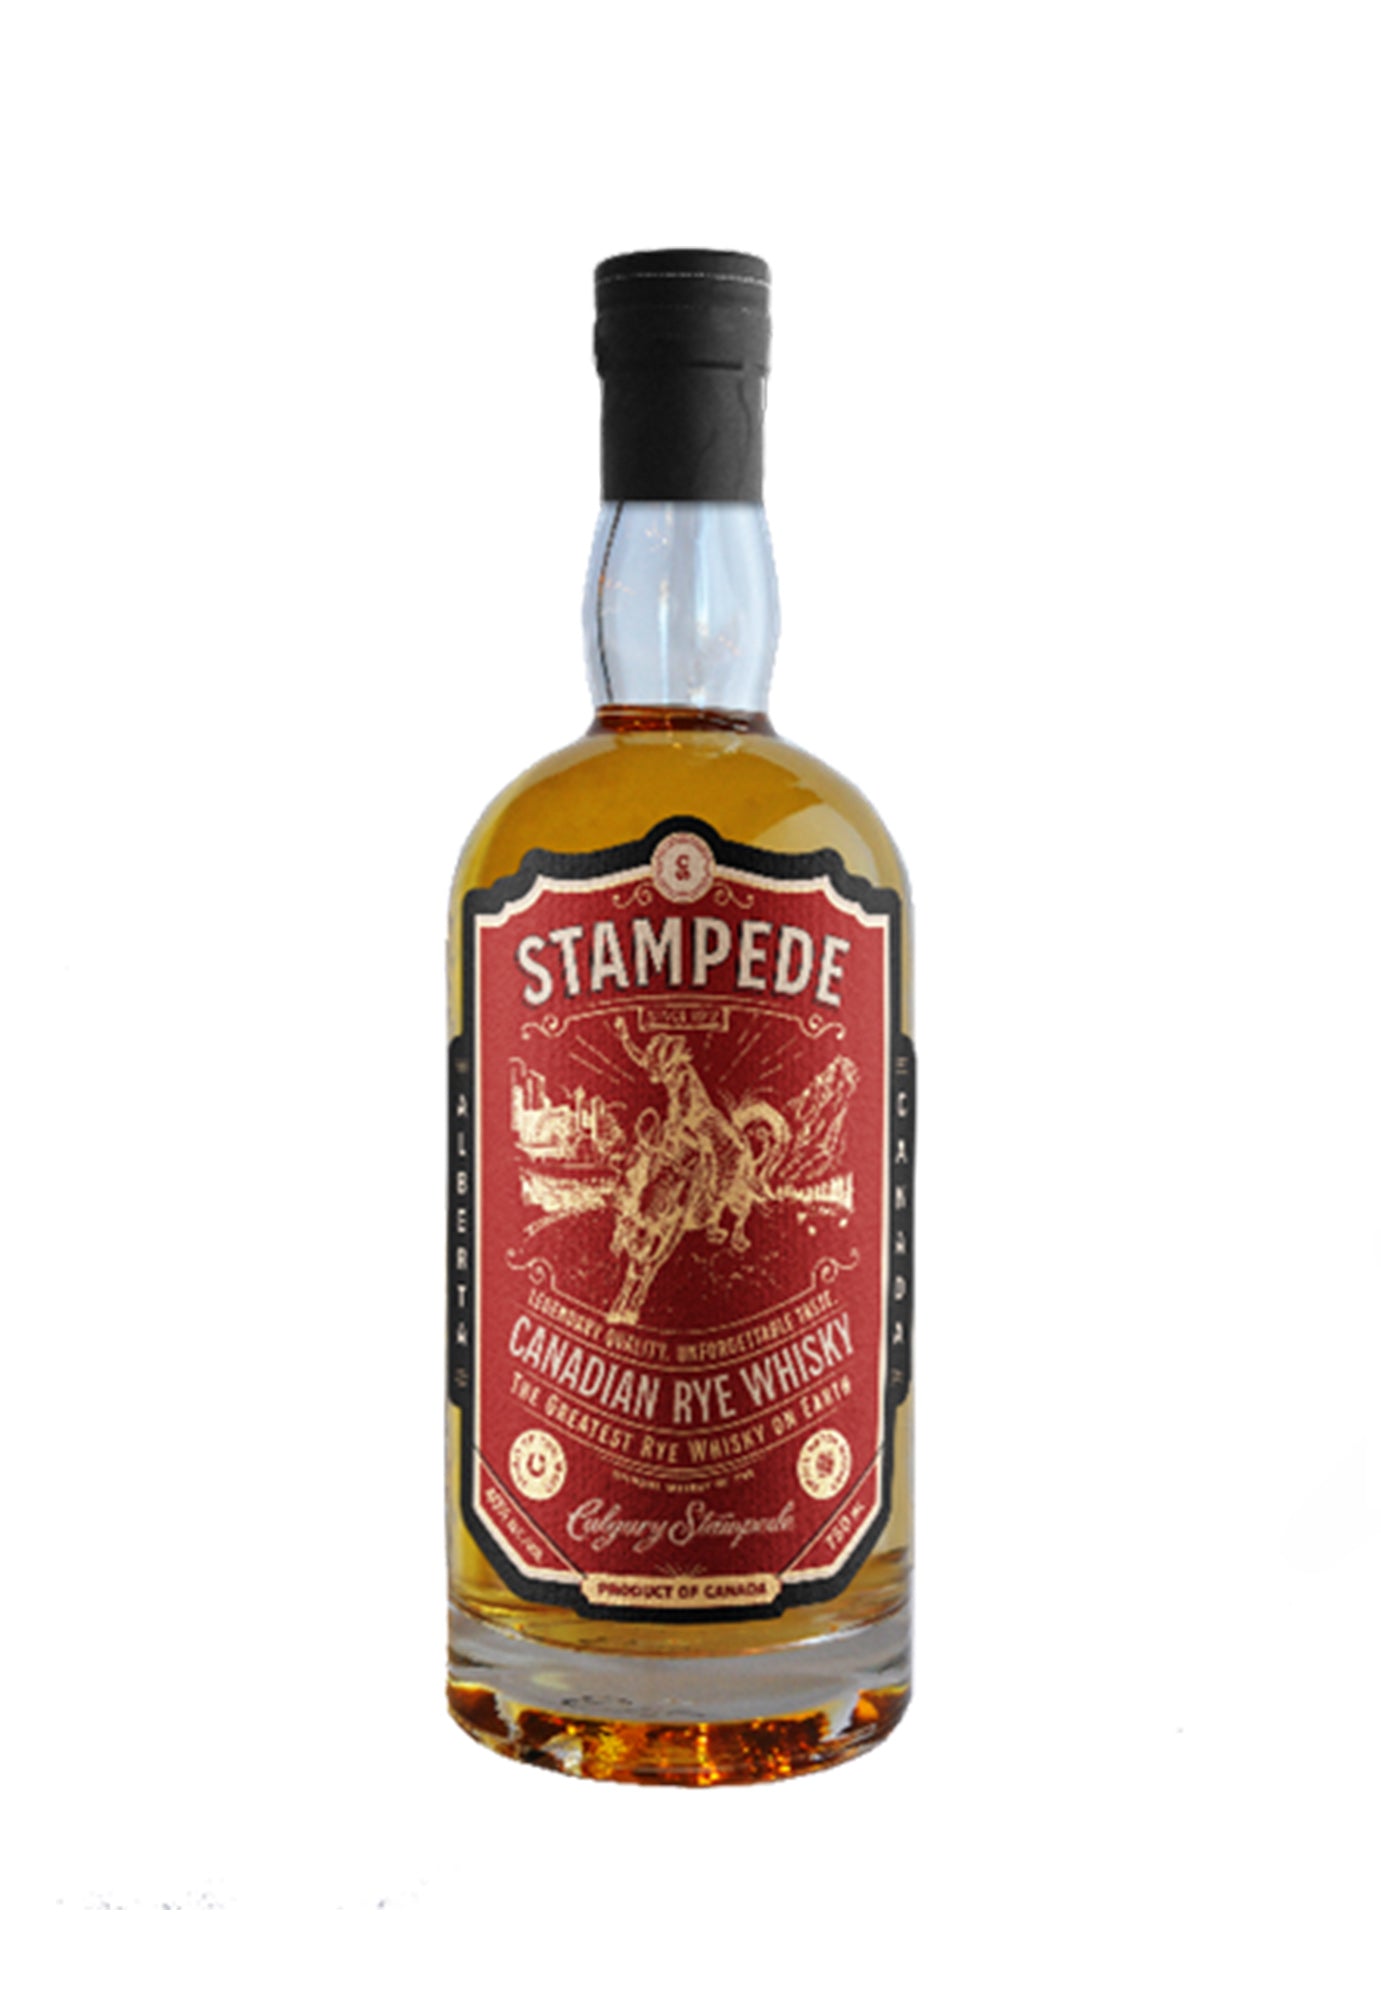 Eau Claire Stampede Canadian Rye Whisky